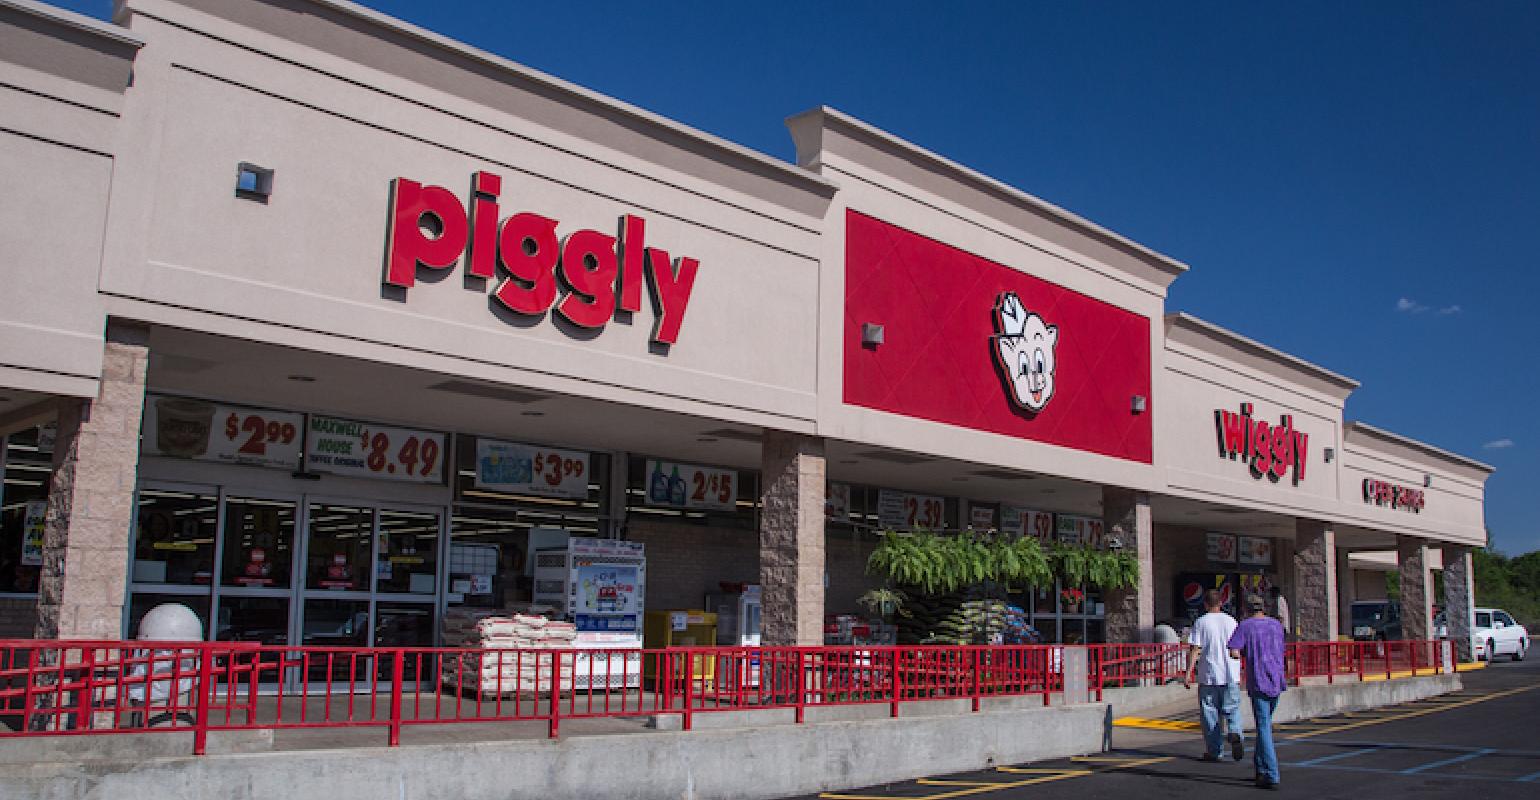 piggly wiggly corporate office telephone number